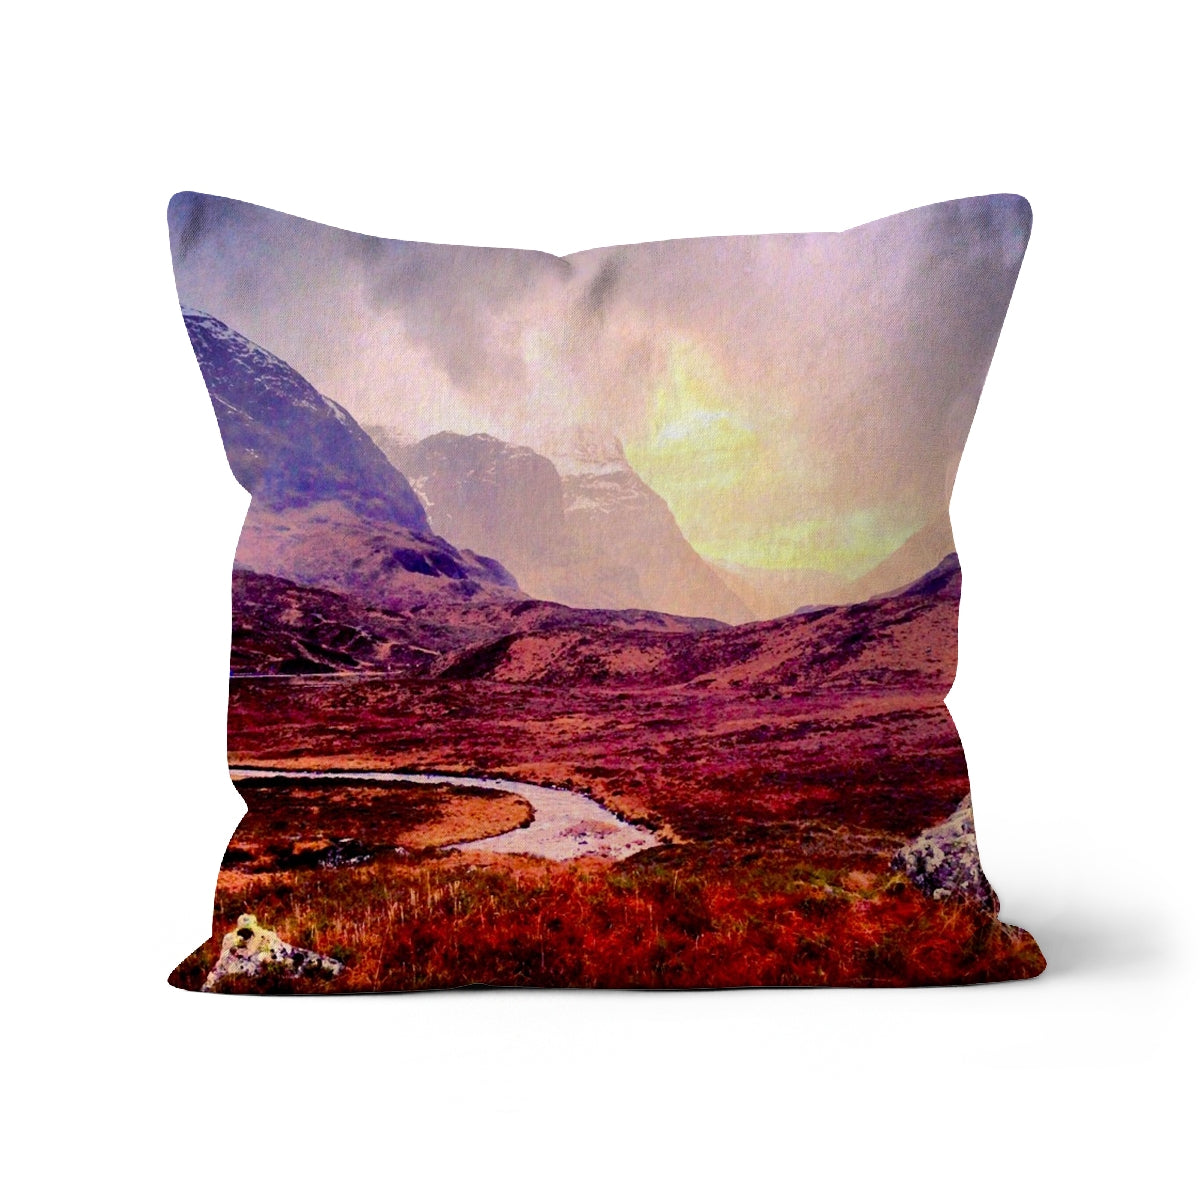 A Brooding Glencoe Art Gifts Cushion-Cushions-Glencoe Art Gallery-Faux Suede-22"x22"-Paintings, Prints, Homeware, Art Gifts From Scotland By Scottish Artist Kevin Hunter